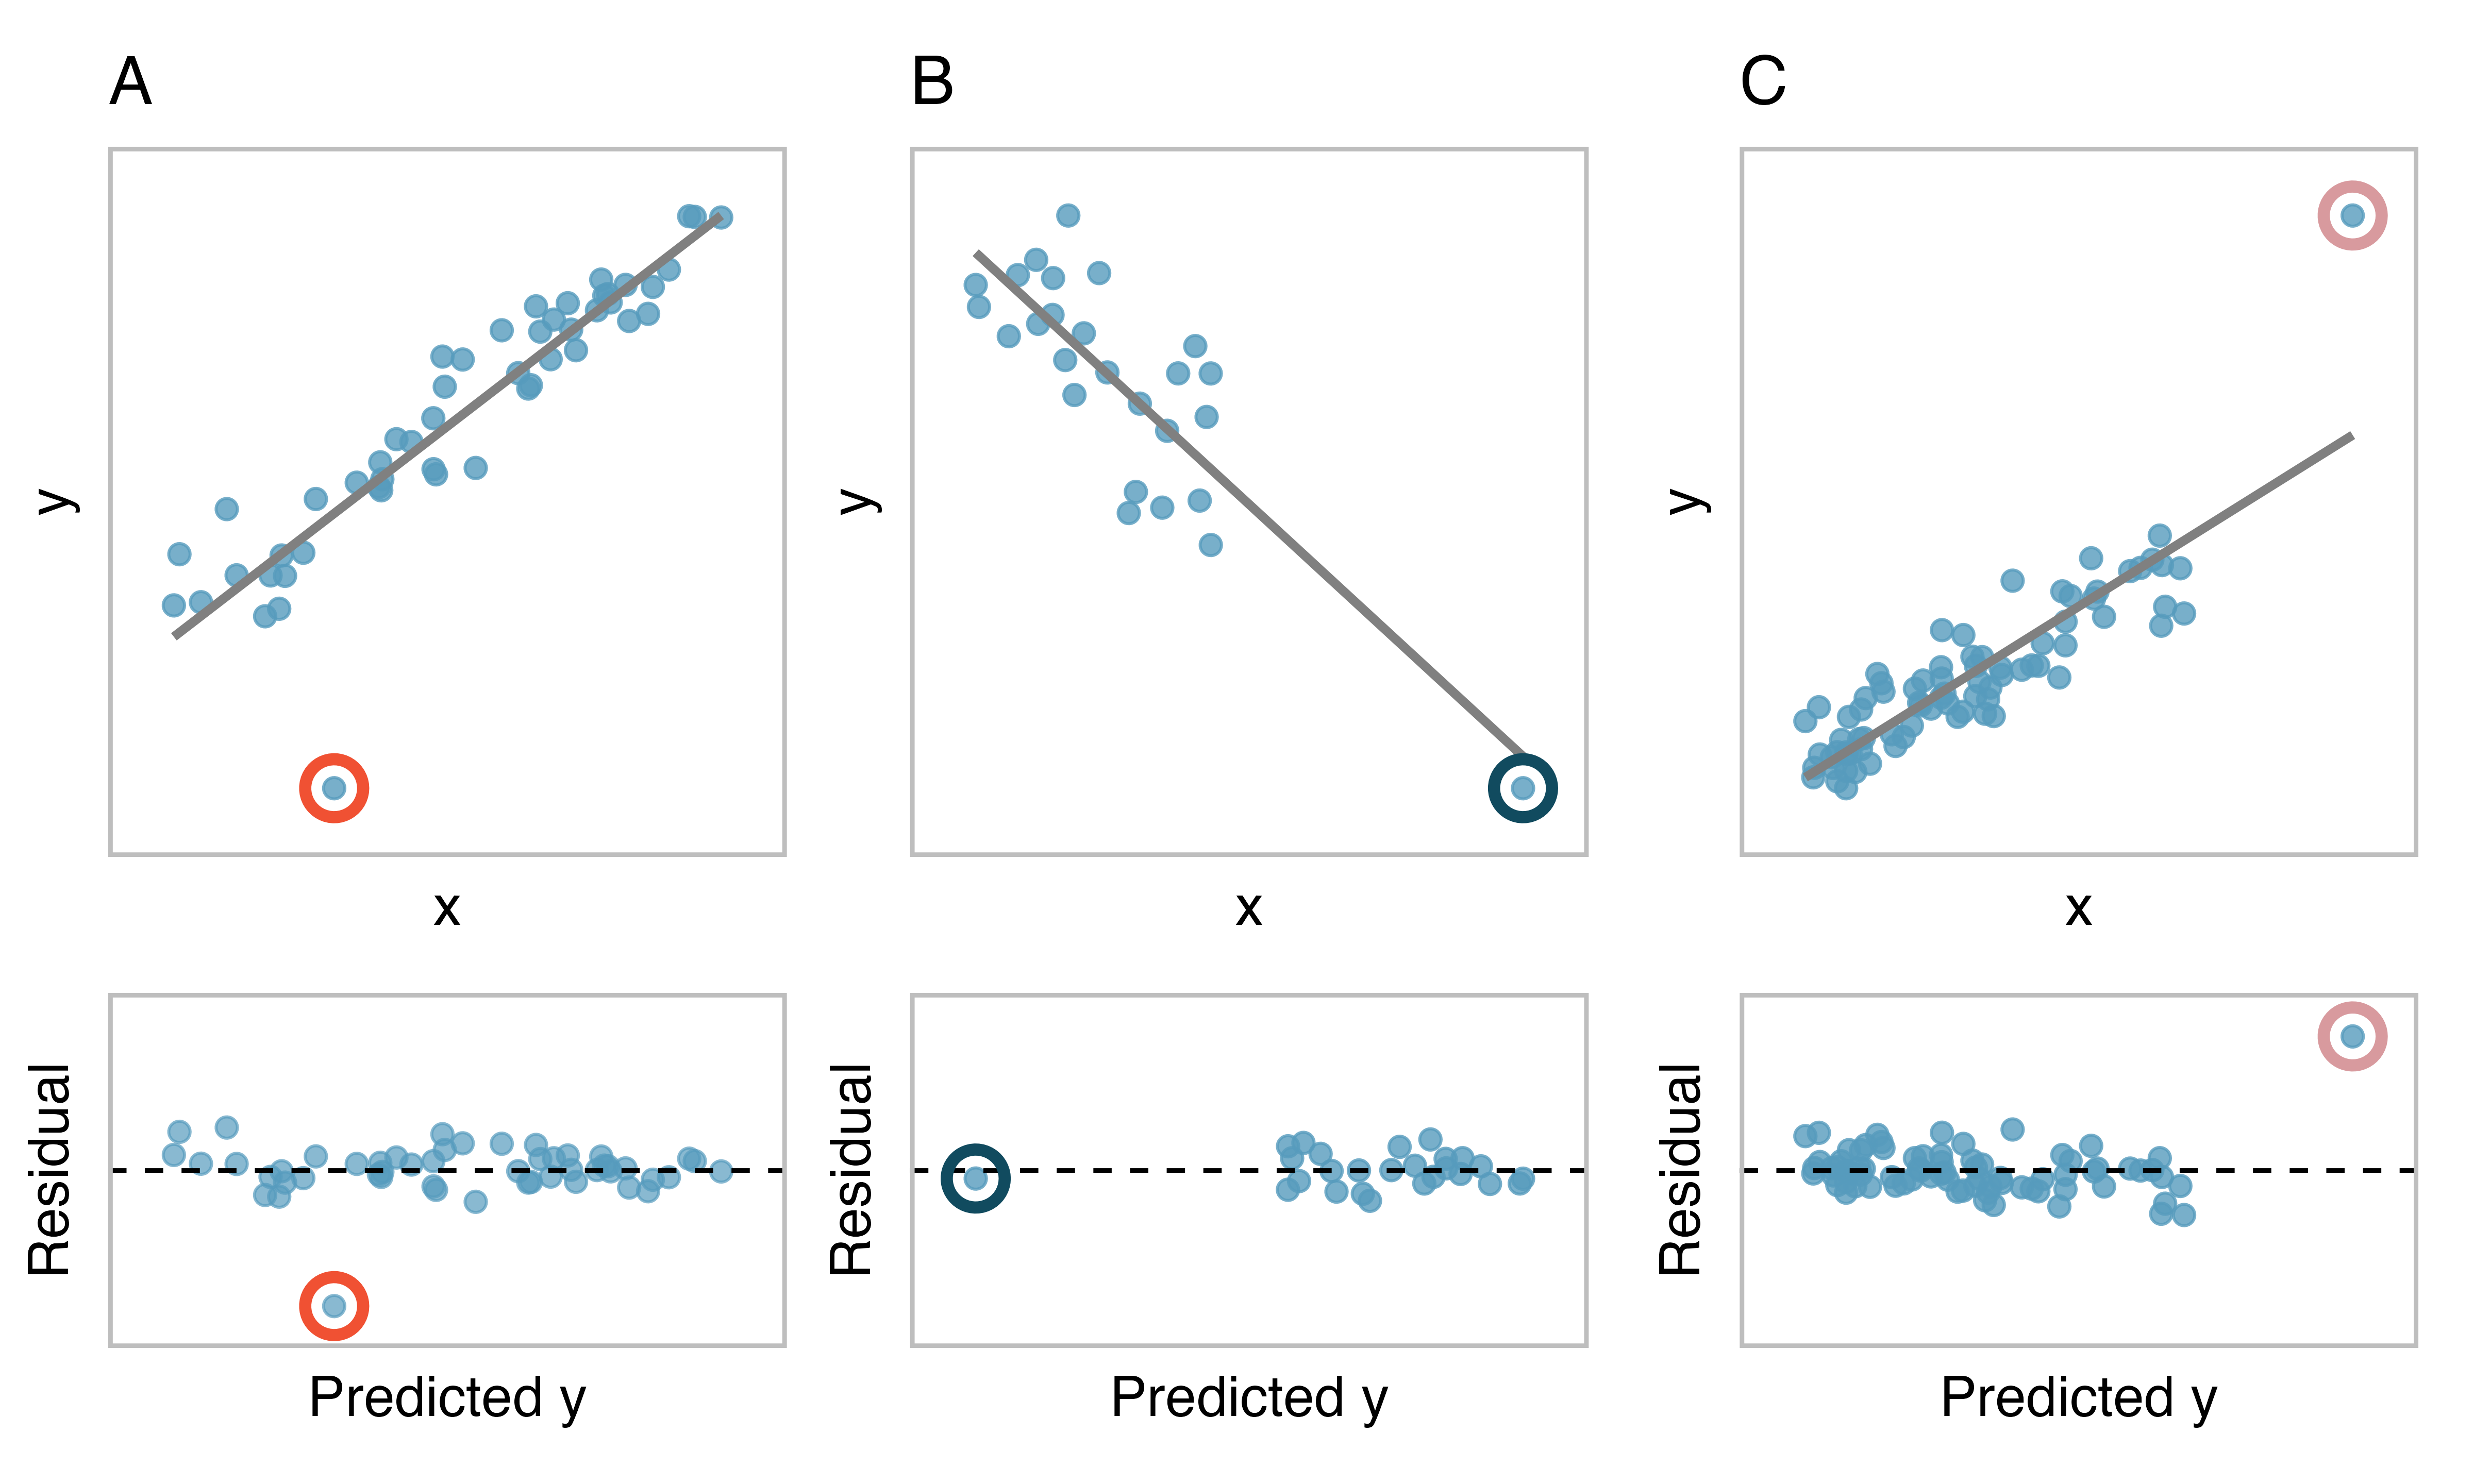 A grid of 2 by 3 scatterplots with fabricated data, all of which contain at least one outlying observation.  The top row of plots contains original x-y data plots with a least squares regression line.  The bottom row of plots is a series of residual plot with predicted value on the x-axis and residual on the y-axis.  The first column of plots gives an example of an outlier in the bivariate model which does not impact the least squares regression line.  The second column gives an example of a point which is outlying in both the x and y directions but it is not a model outlier. The third column gives an example of a point that pulls the regression line toward it, impacting the least squares line.